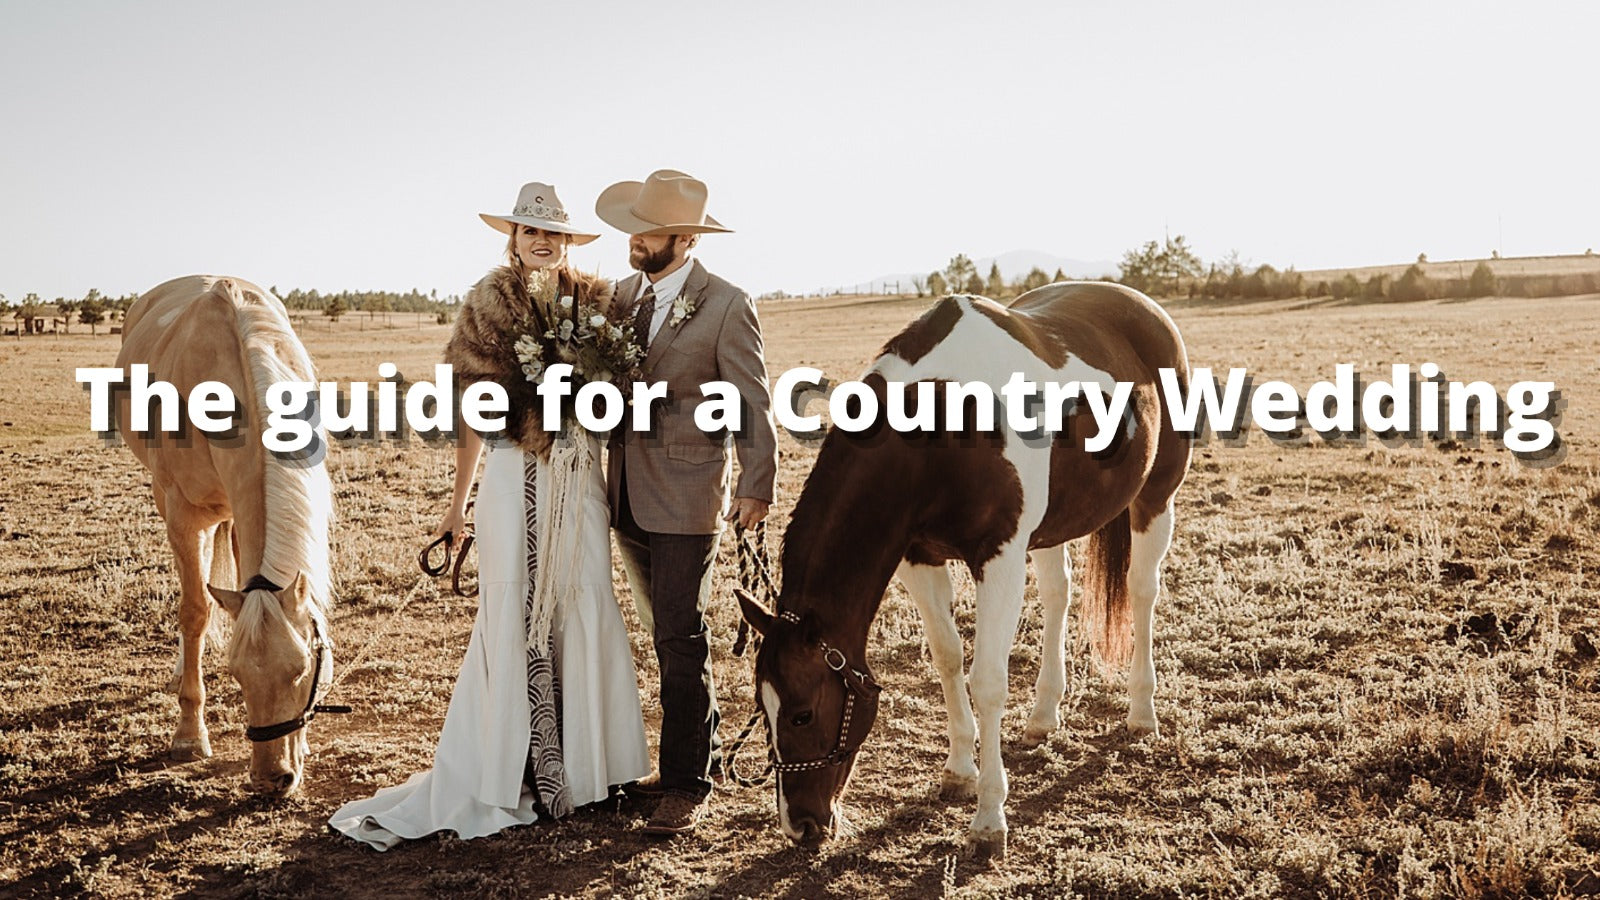 The guide for a Country Wedding